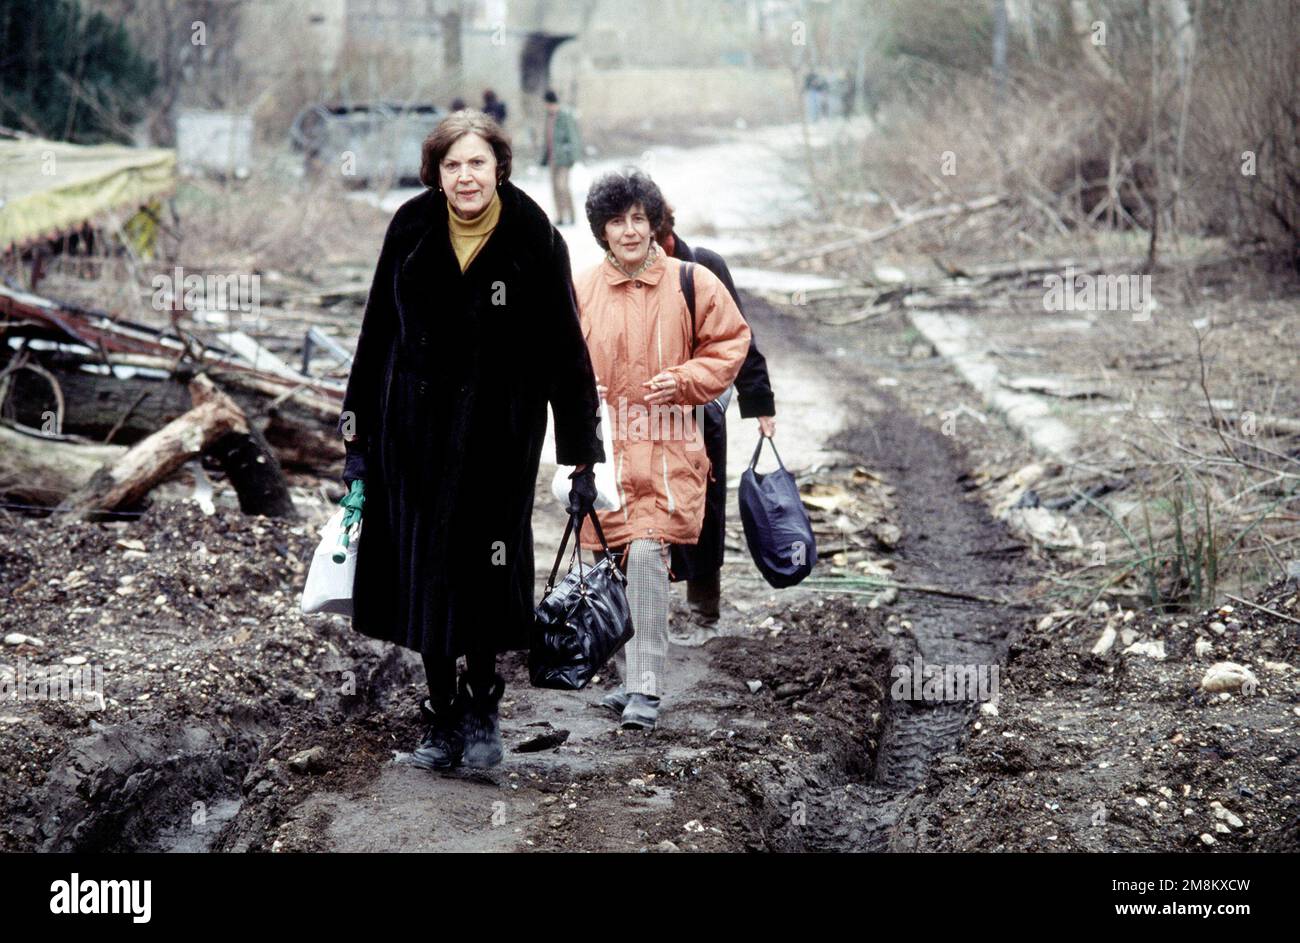 Muslim women make their way through the mud as they carry their belongings to their new apartments in this Sarajevo suburb called Grbavica. The apartments and houses once occupied by Bosnian Serbs are the last group to be turned over to the Muslims as required by the recent Dayton Peace accord which produced a cease fire and permanent borders. Subject Operation/Series: JOINT ENDEAVOR Base: Grbavica State: Sarajevo Country: Bosnia And/I Herzegovina (BIH) Stock Photo